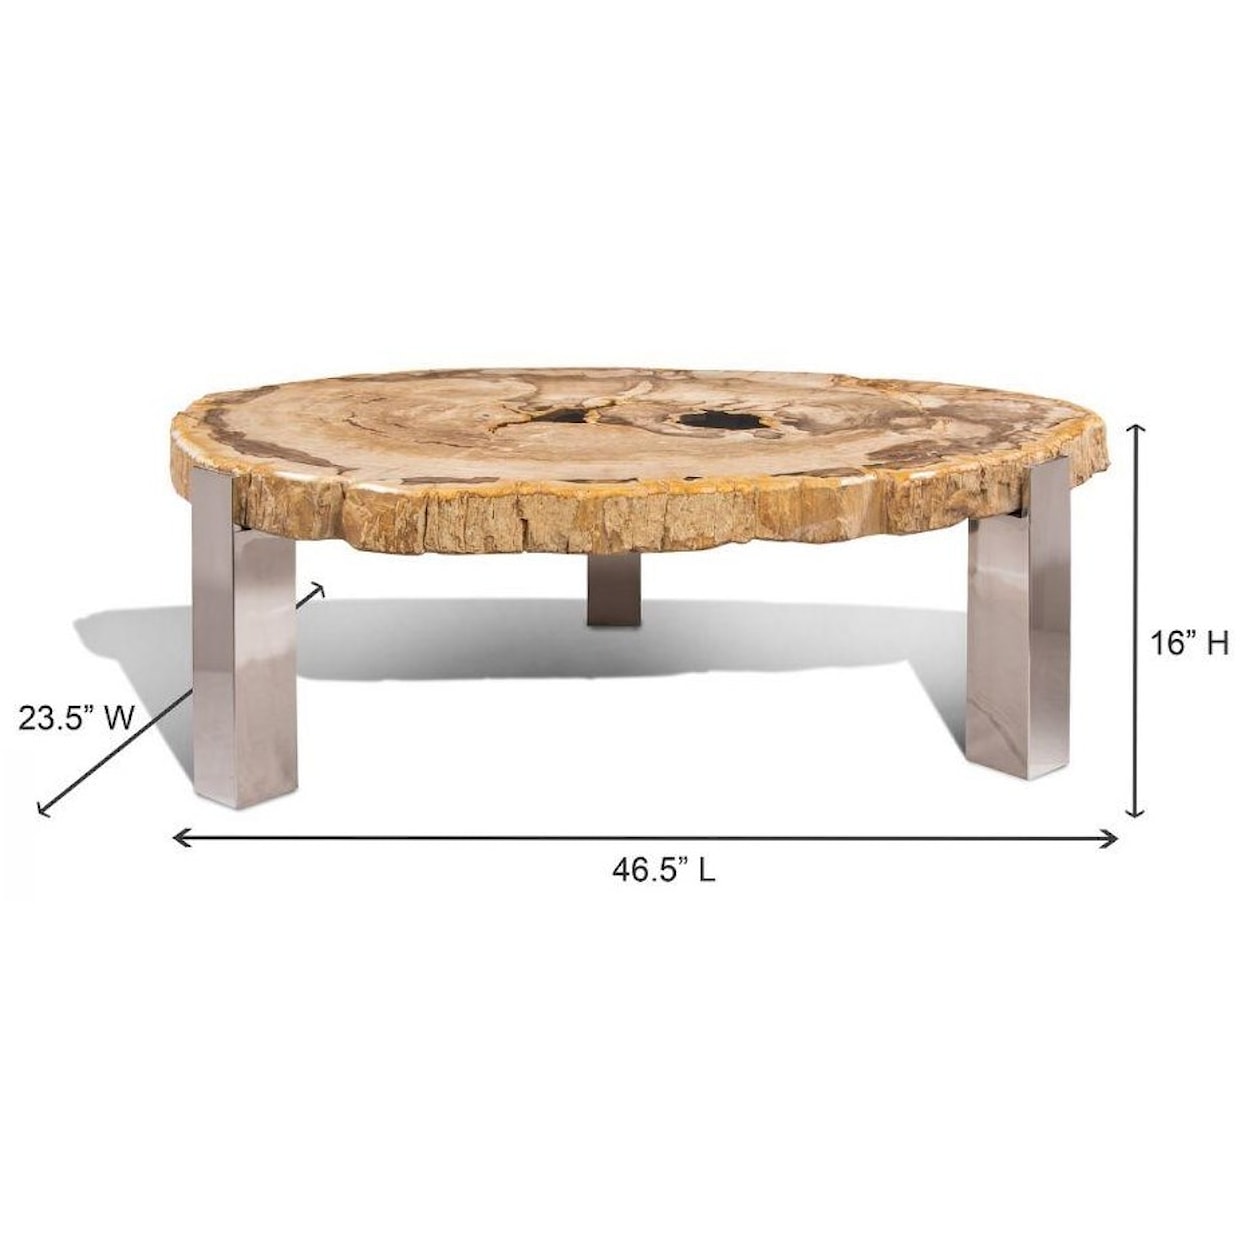 Ibolili Coffee Tables Dundee Petrified Wood Table, Oval